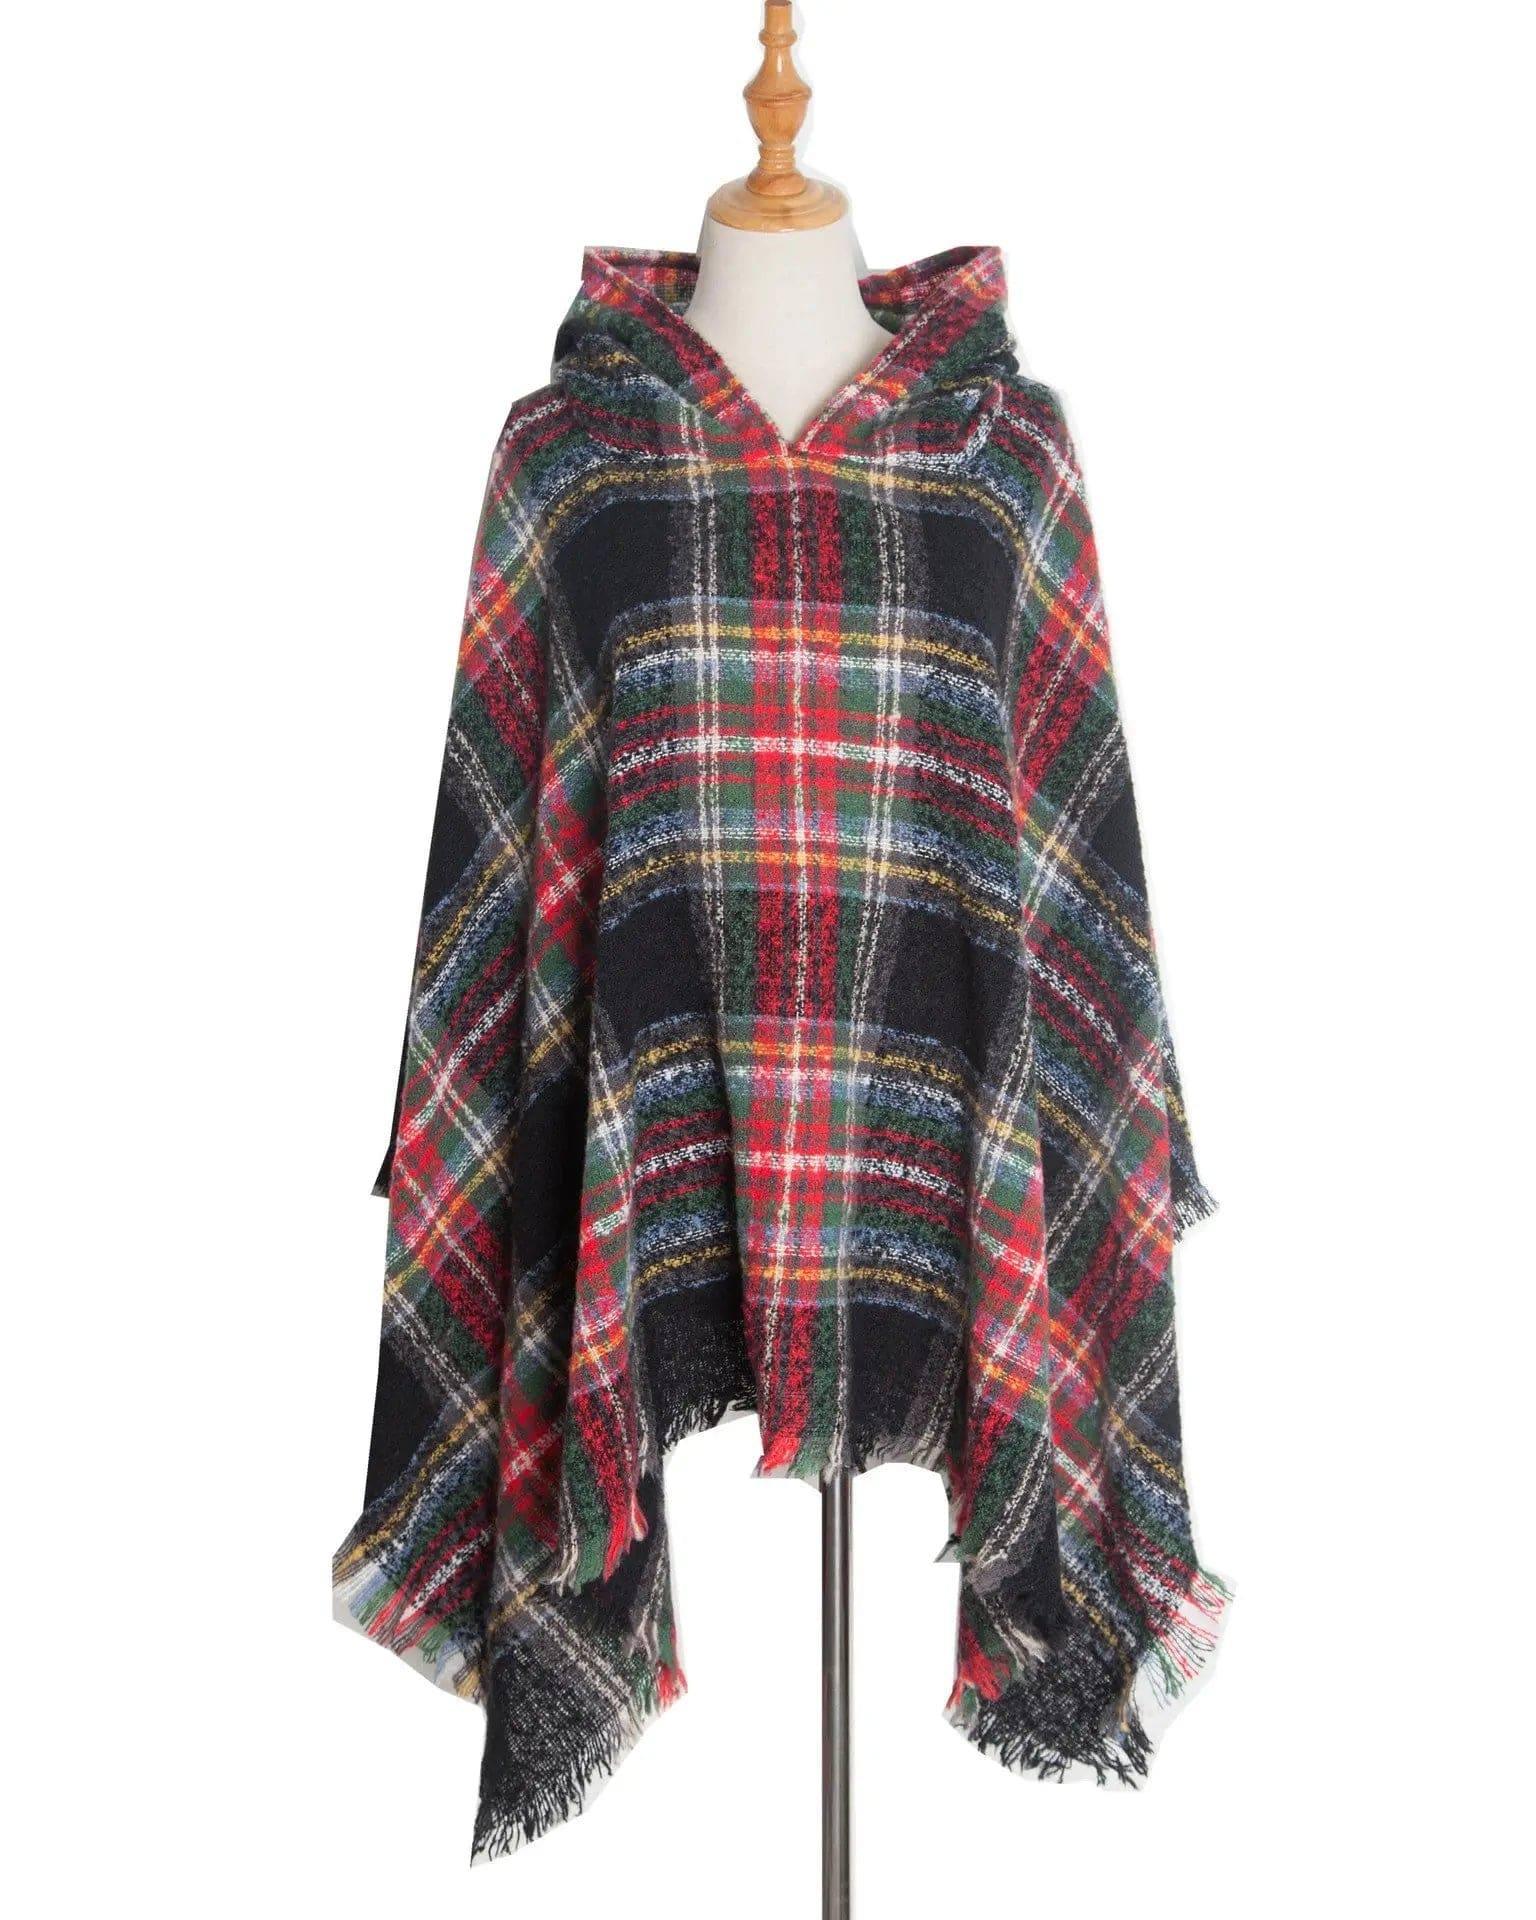 Spring Autumn And Winter Plaid Ribbon Cap Cape And Shawl-DP7 08 Black-16